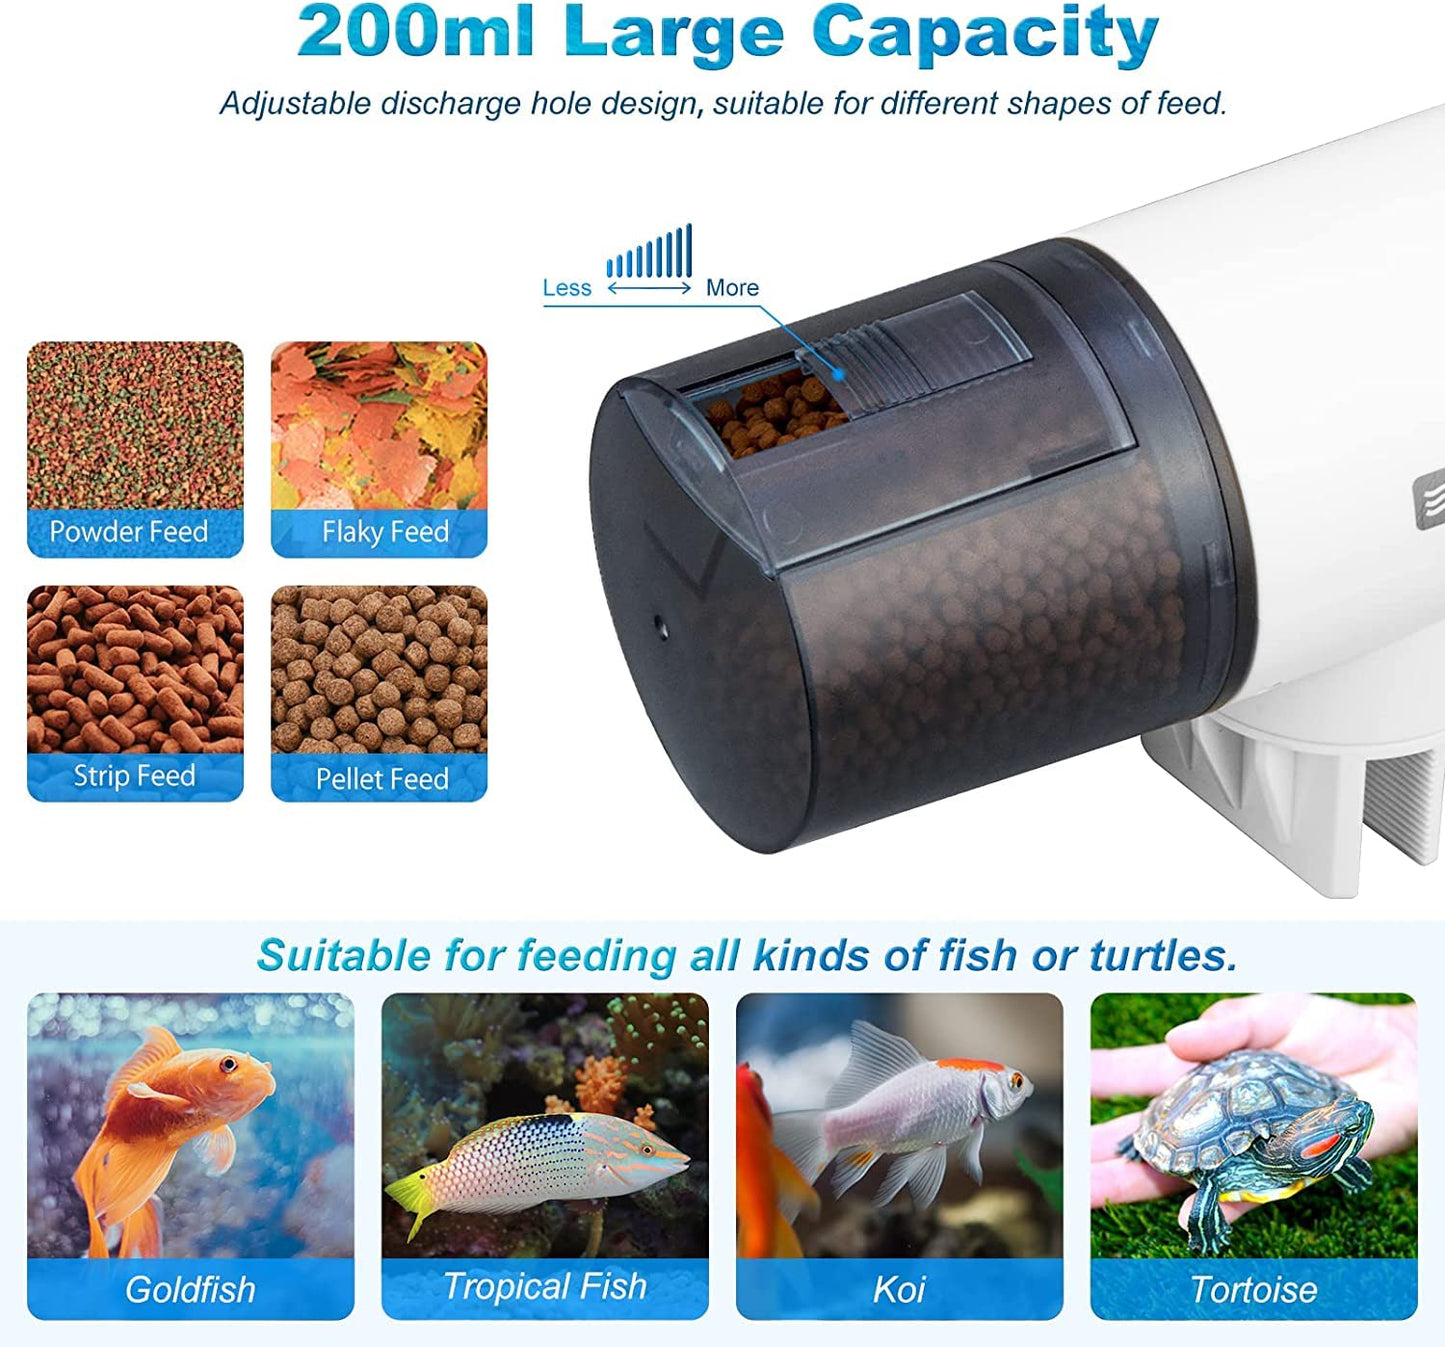 YEE YSQ-750 Four Mode (8Hr, 12Hr, 24Hr and 48Hr) Digital LCD Dispaly 360 Degree Adjustable Electric Automatic Fish Food Feeder Timer for Aquarium Fish Tank